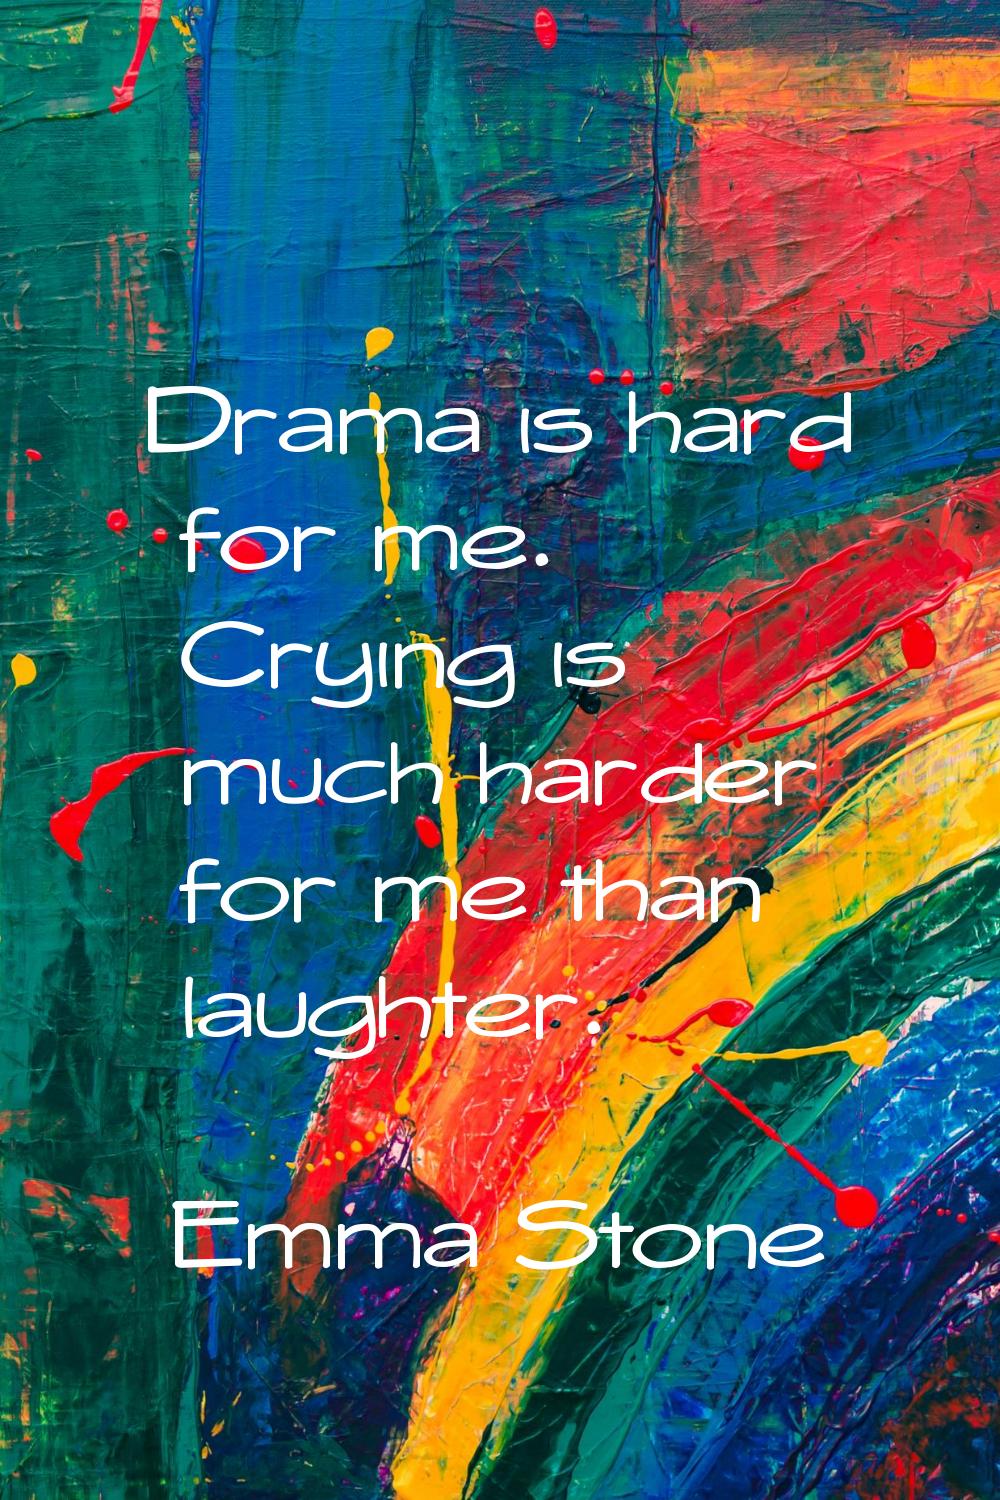 Drama is hard for me. Crying is much harder for me than laughter.